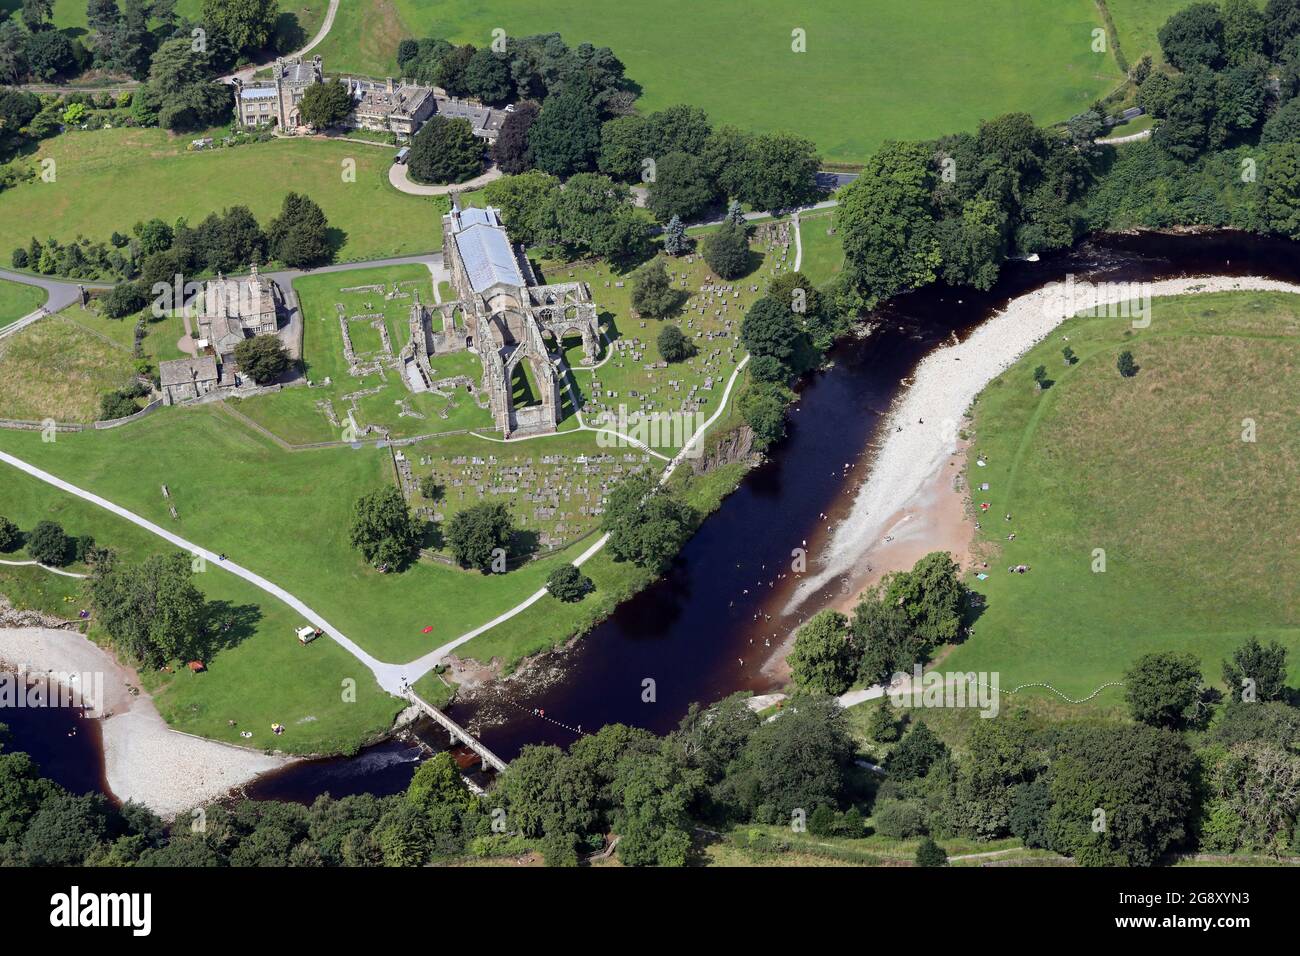 aerial view of Bolton Abbey with visitors sunbathing and swimming in the River Wharfe Stock Photo